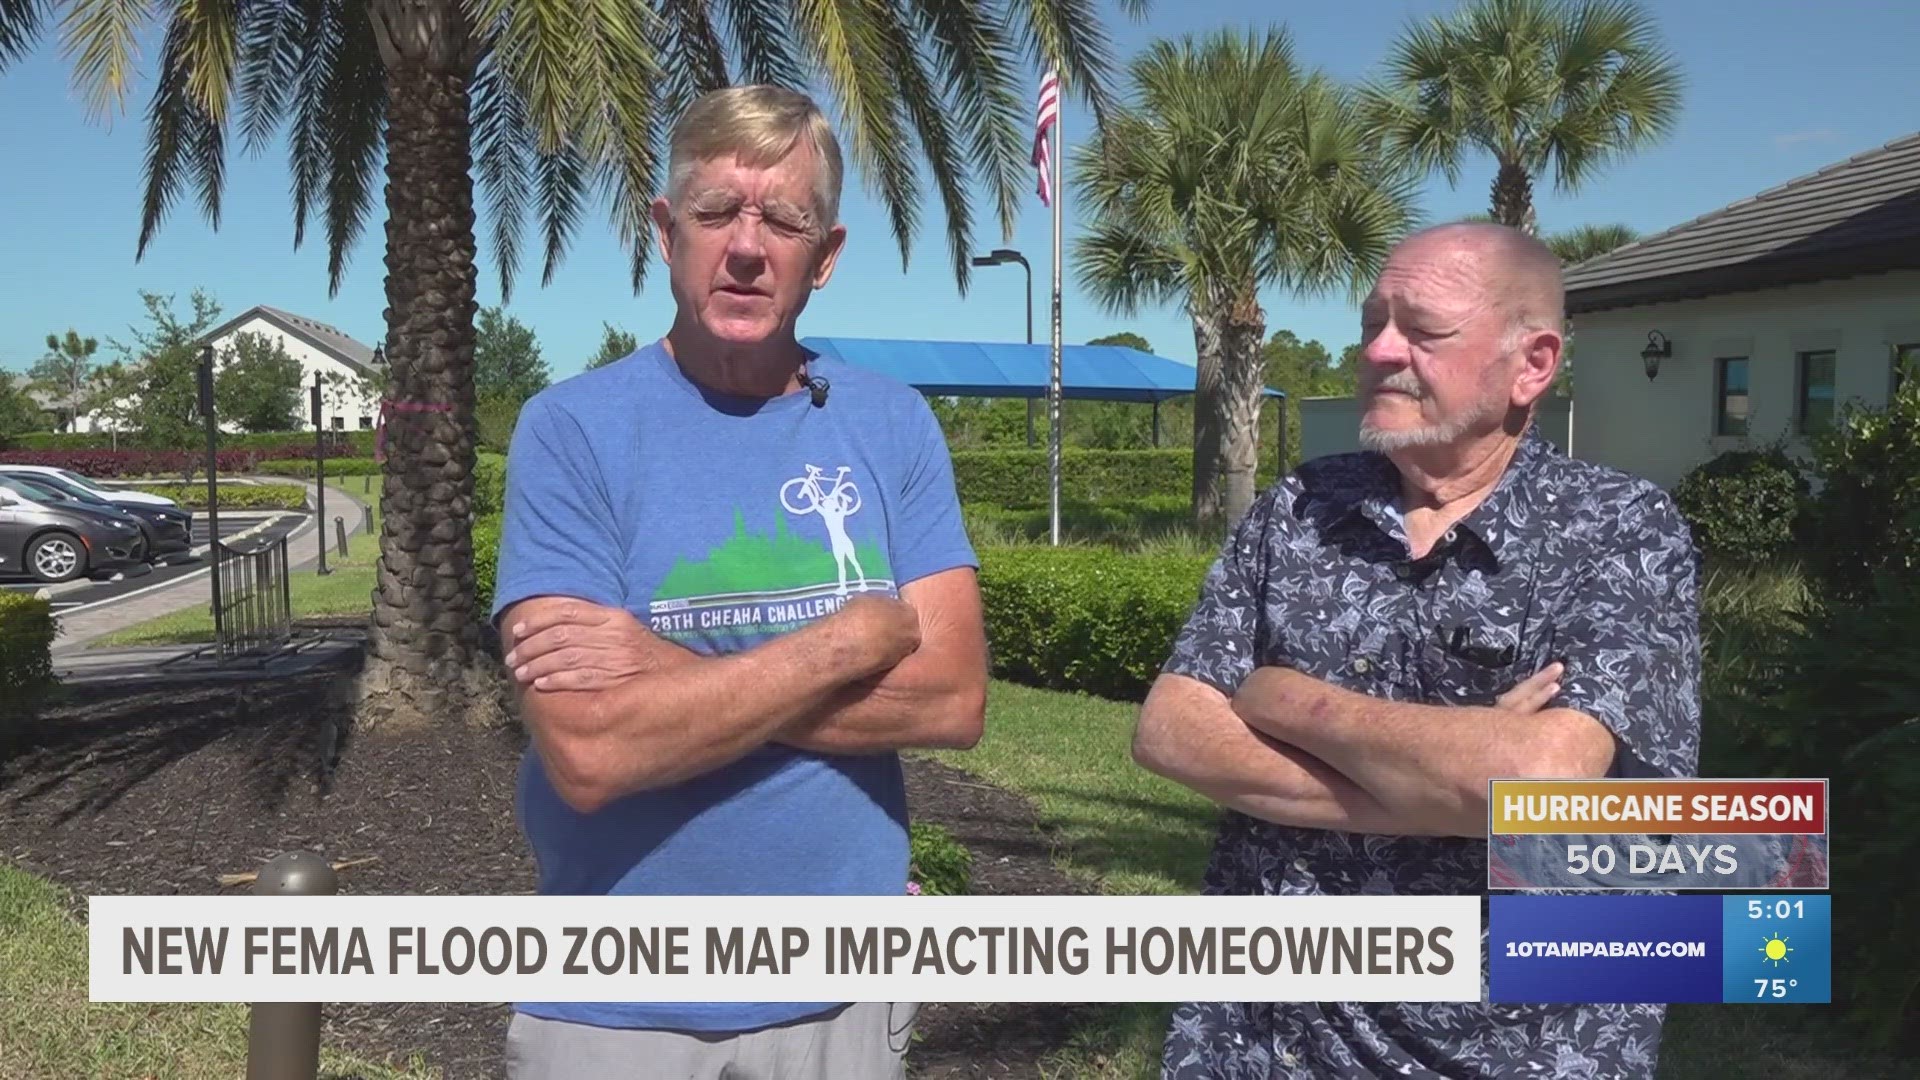 FEMA's new flood zone map is costing homeowners who didn't previously budget for flood insurance.